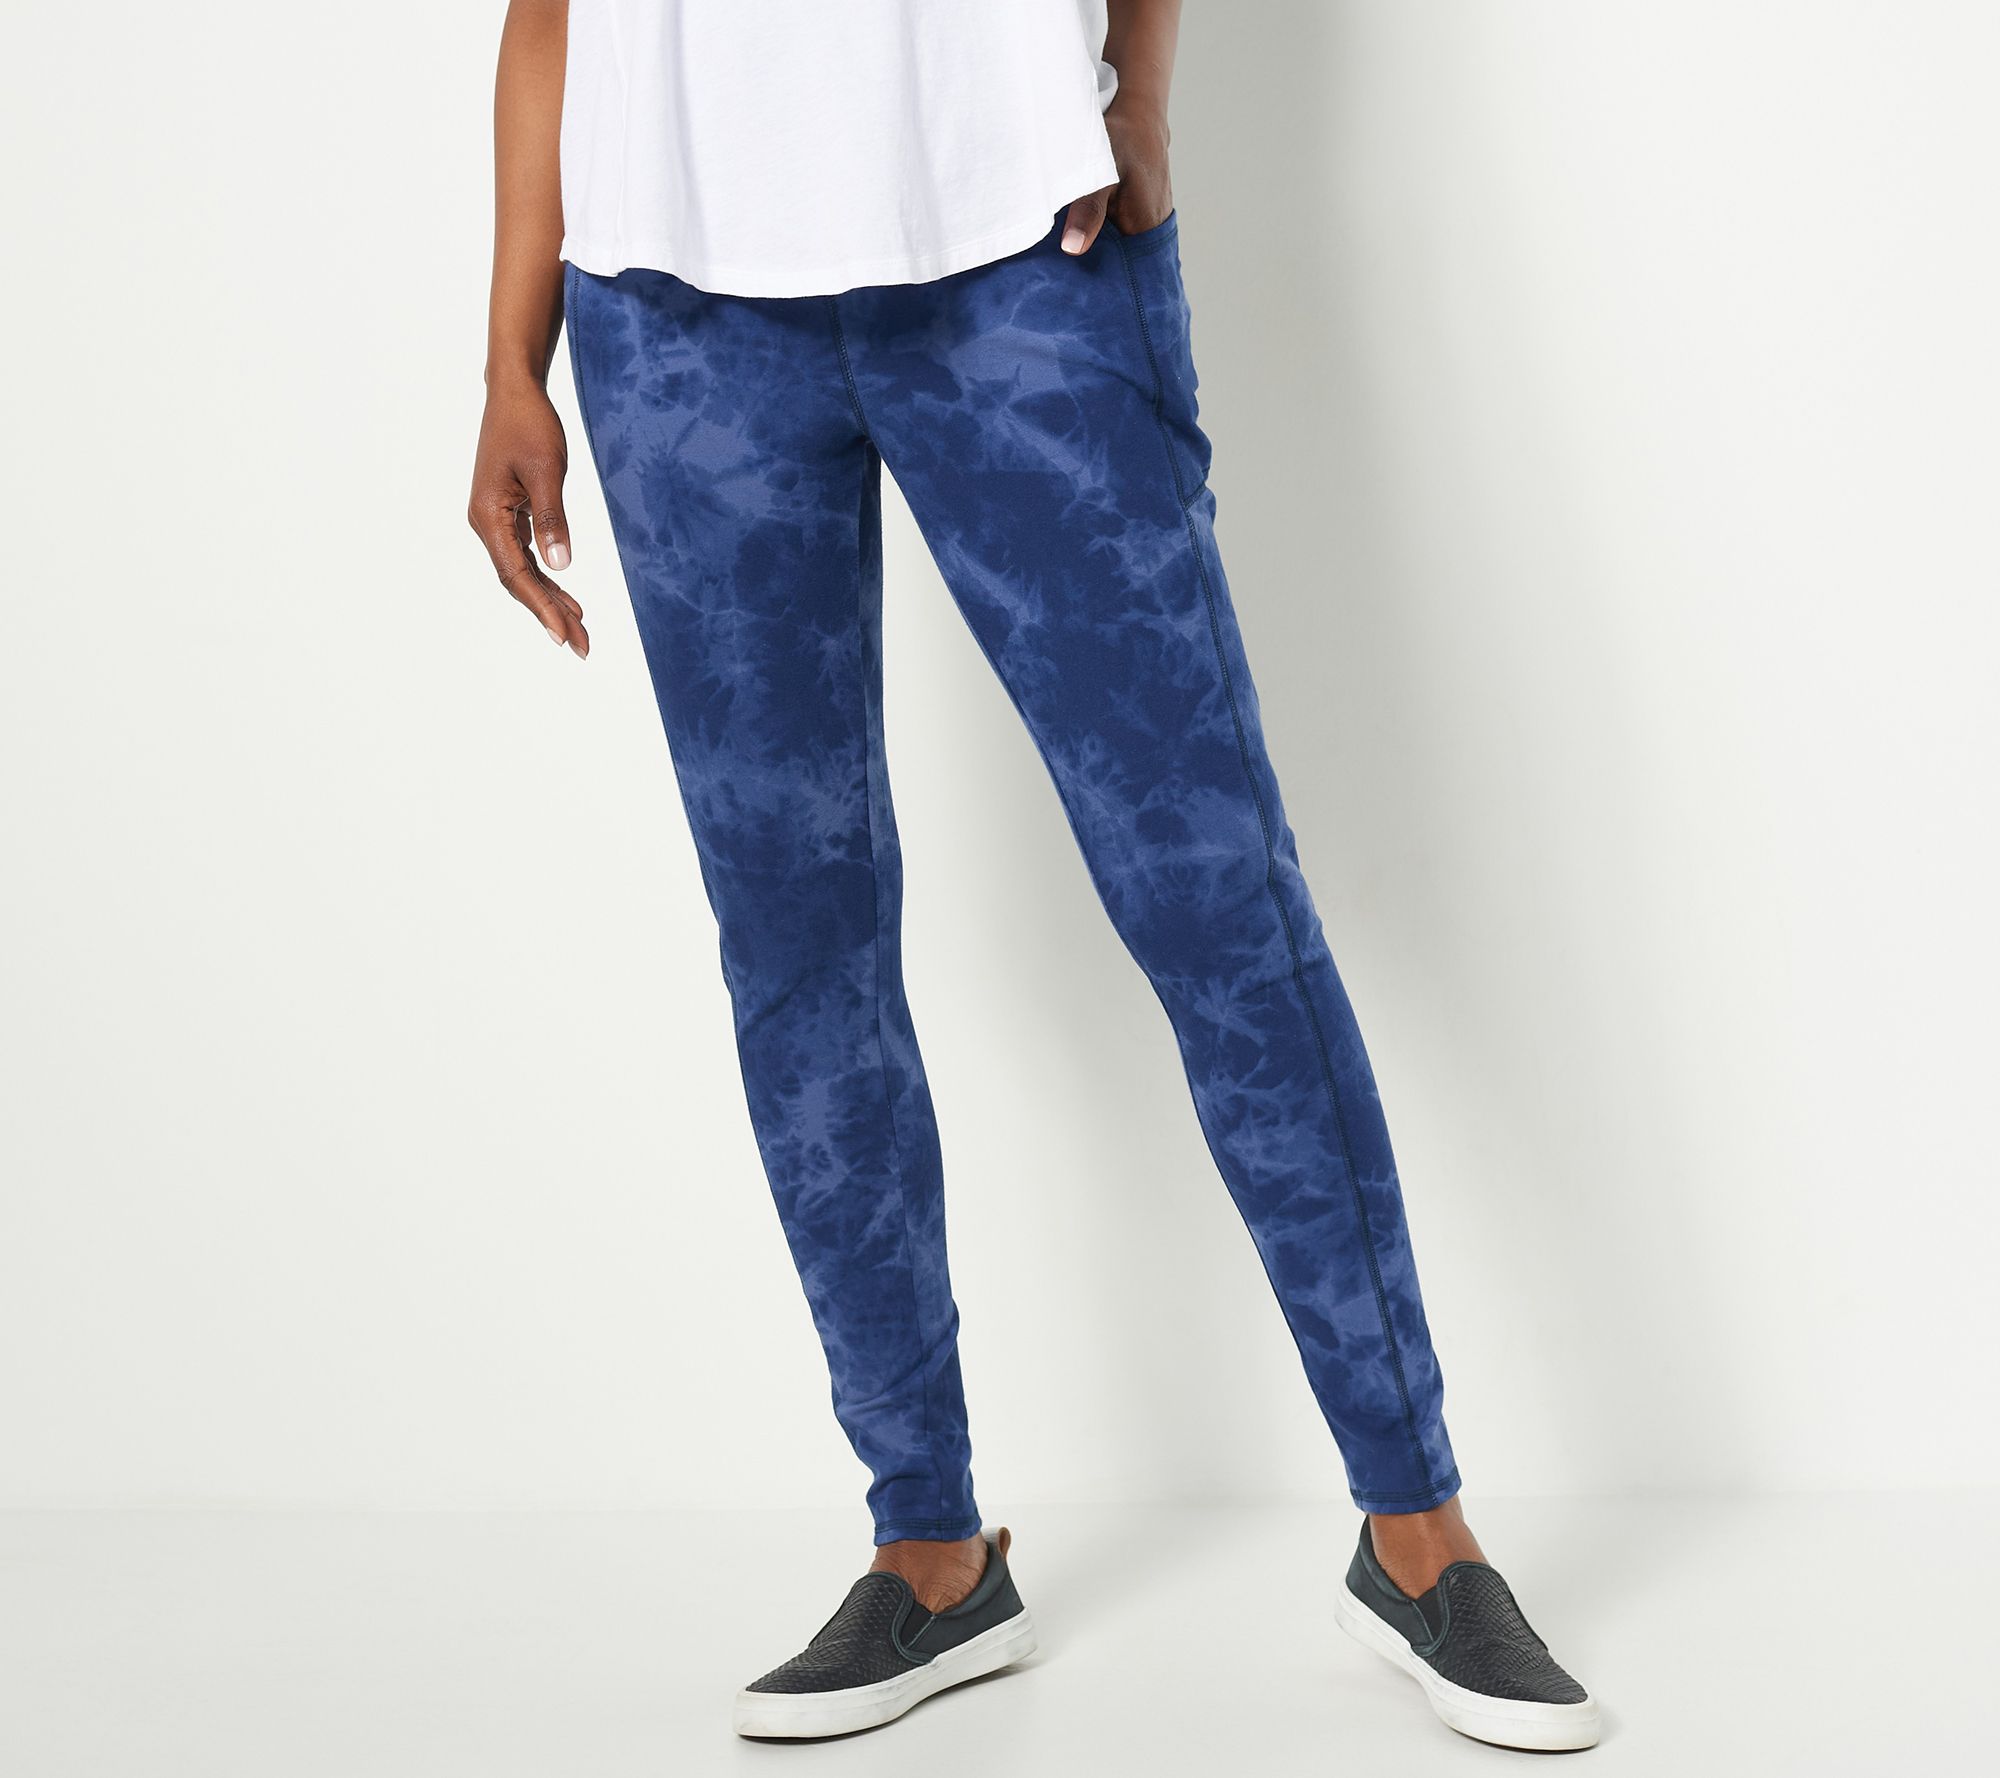 Denim & Co. Active Petite Printed Duo Stretch Legging with Pintuck 